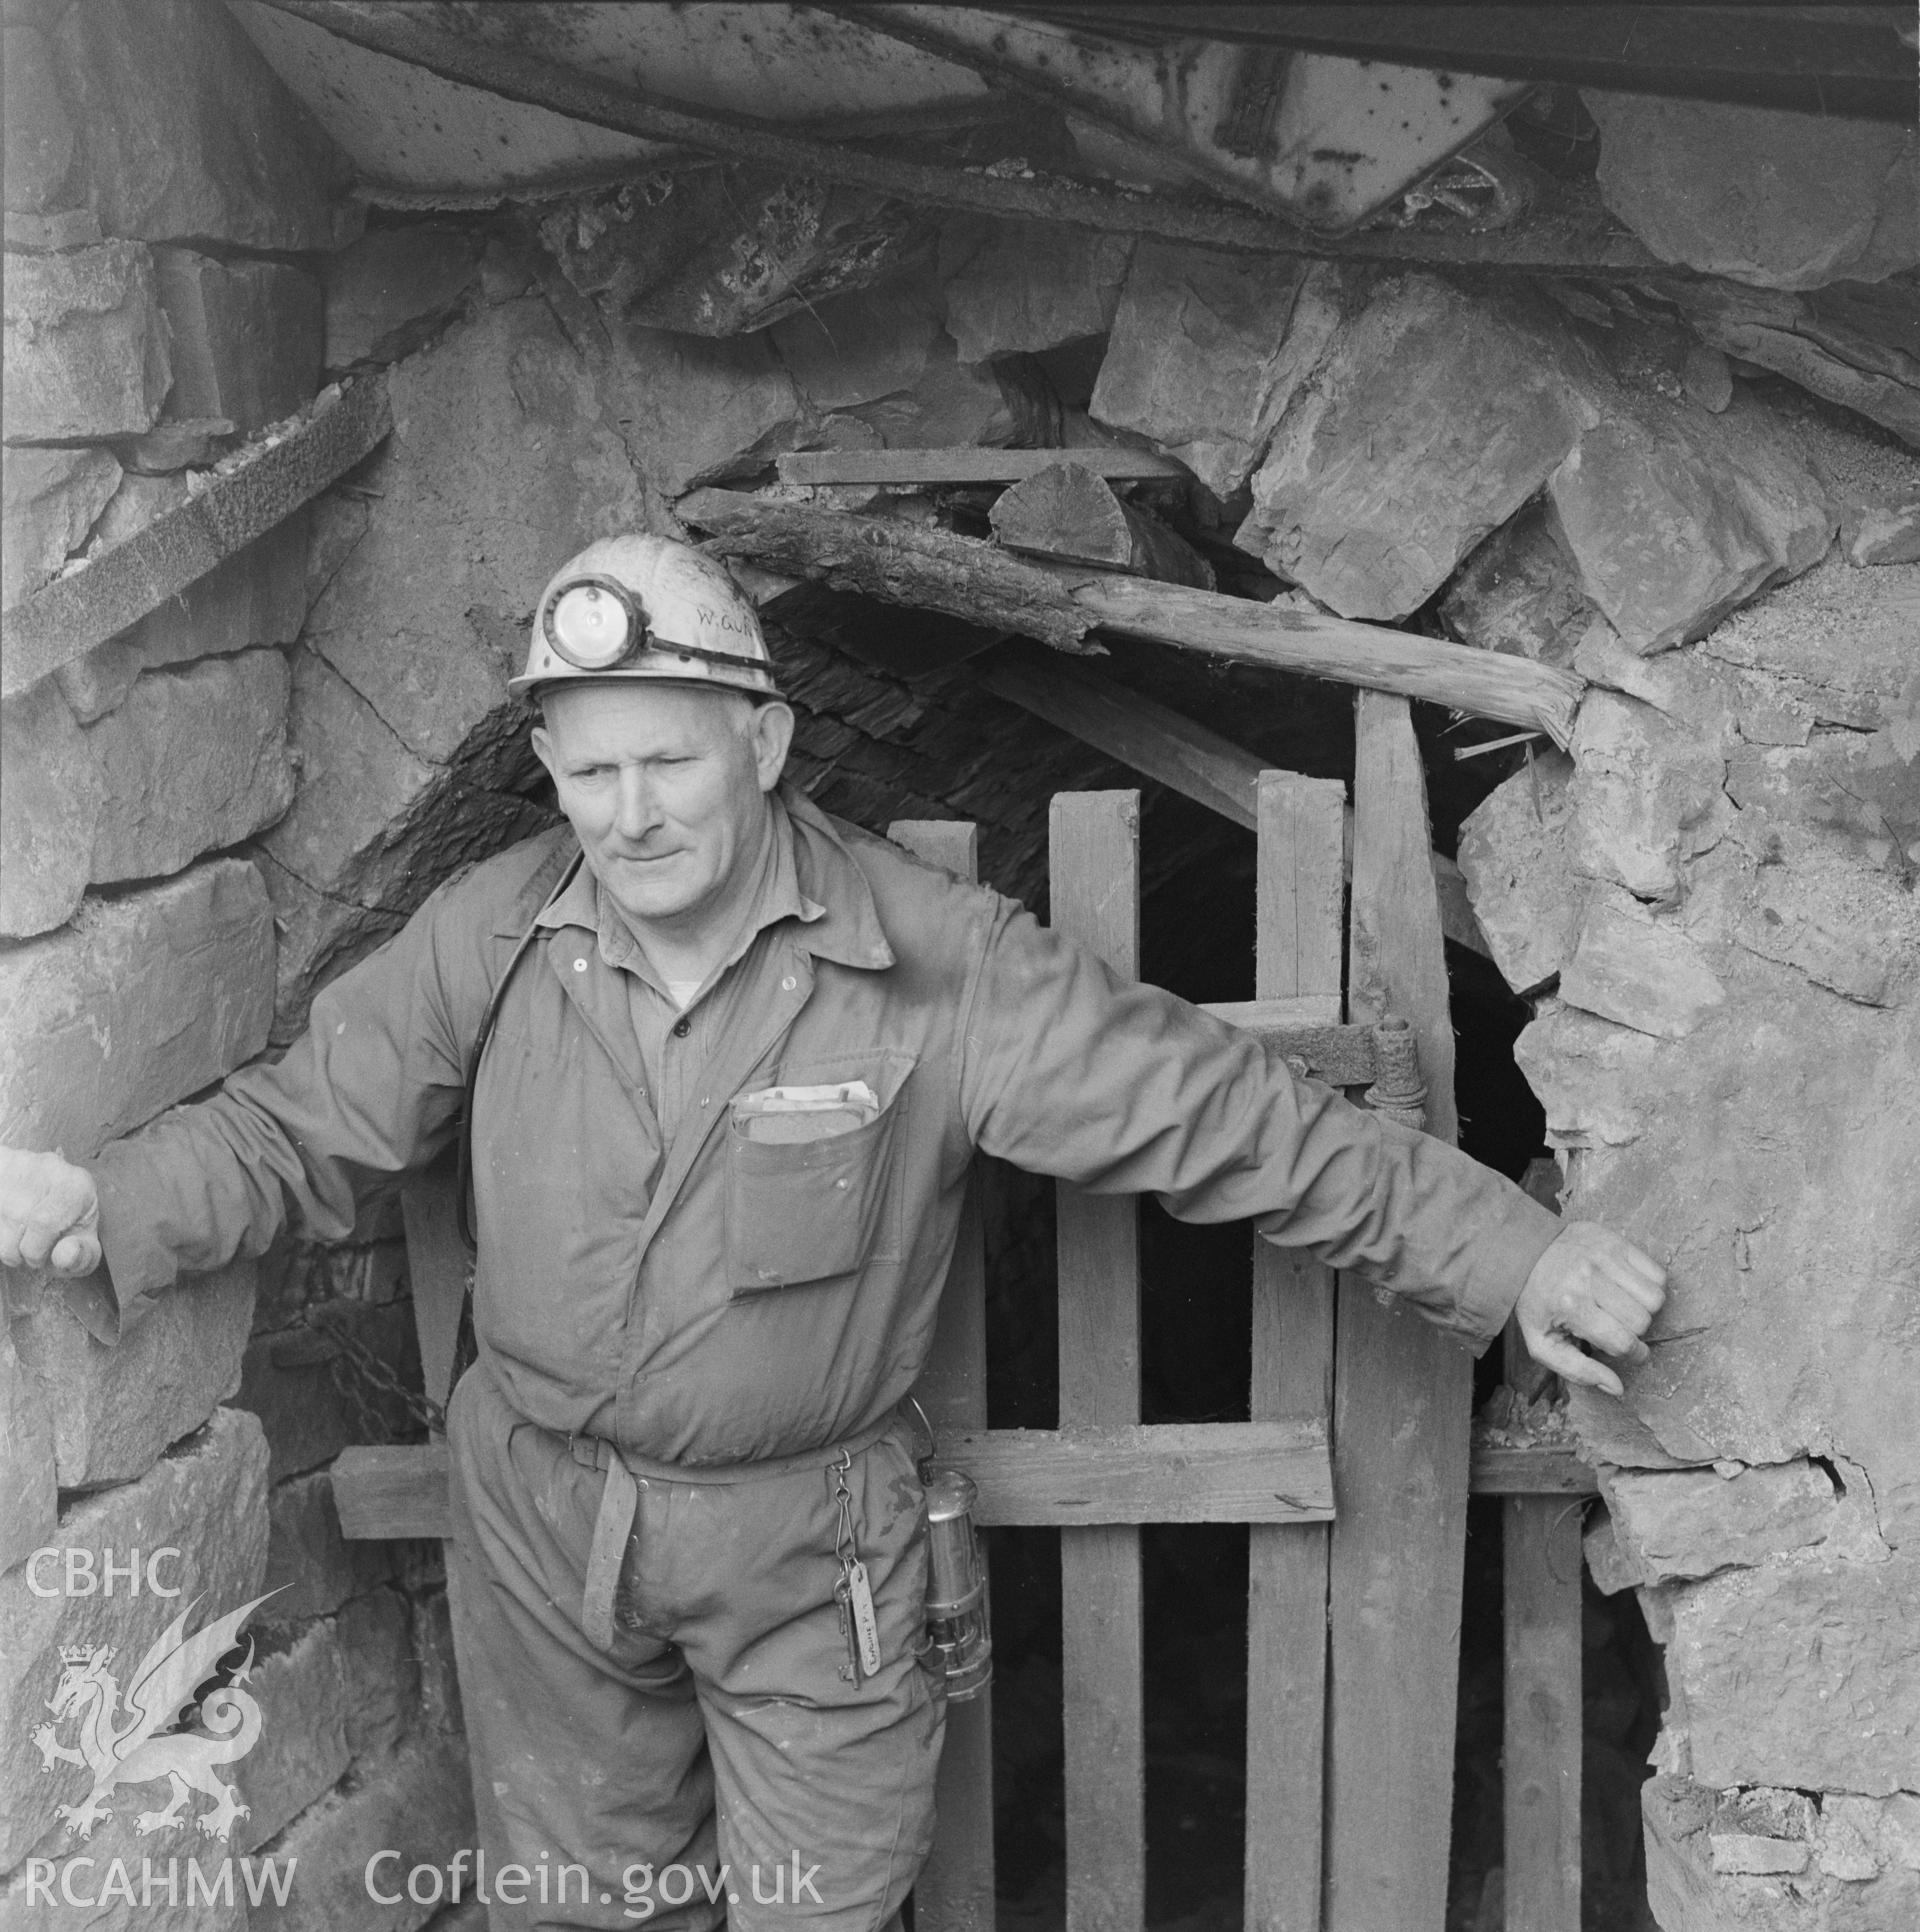 Digital copy of an acetate negative showing entrance to Dick Kear's slope at Big Pit, from the John Cornwell Collection.